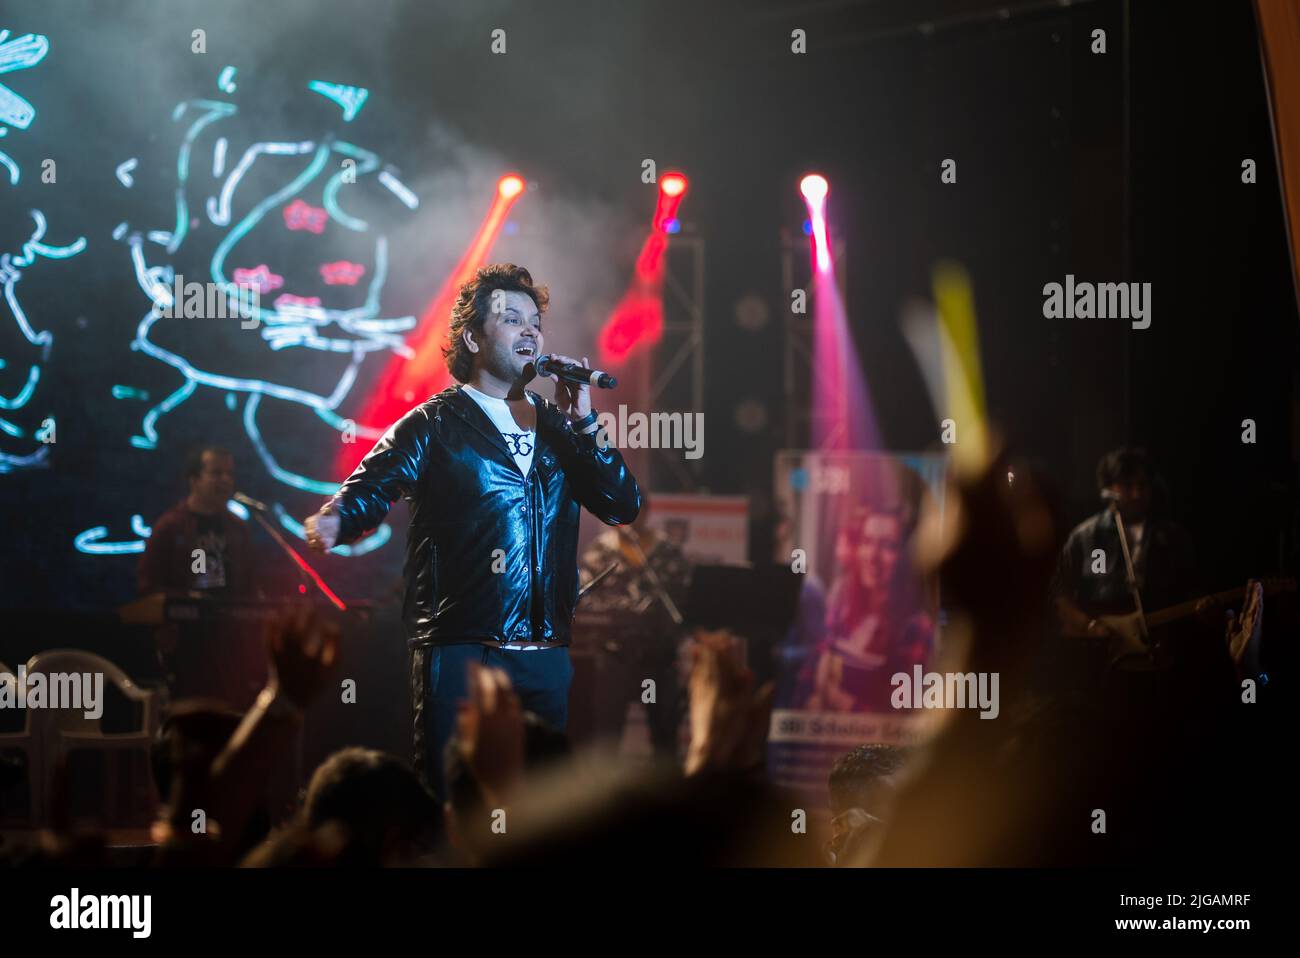 A view of a concert of Javed Ali at Jamshedpur, India Stock Photo